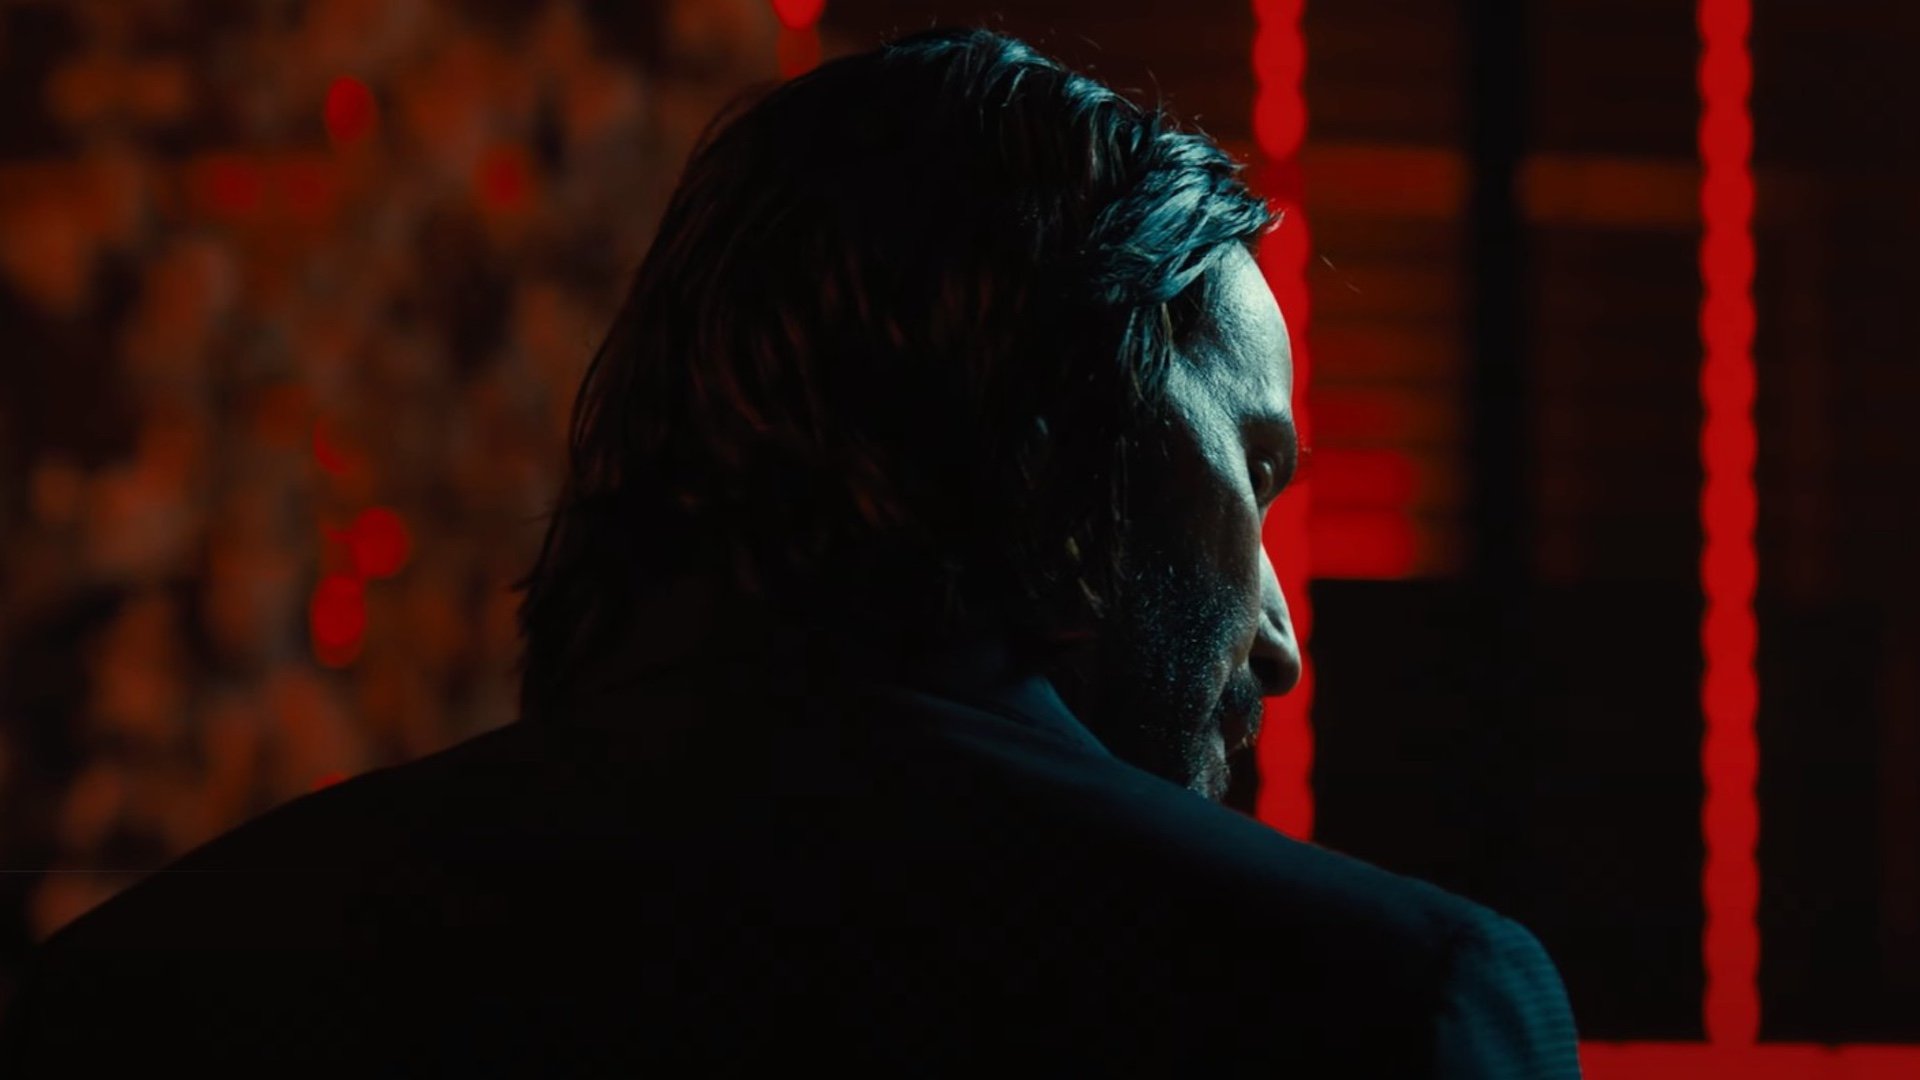 Chad Stahelski not so sure about John Wick 5